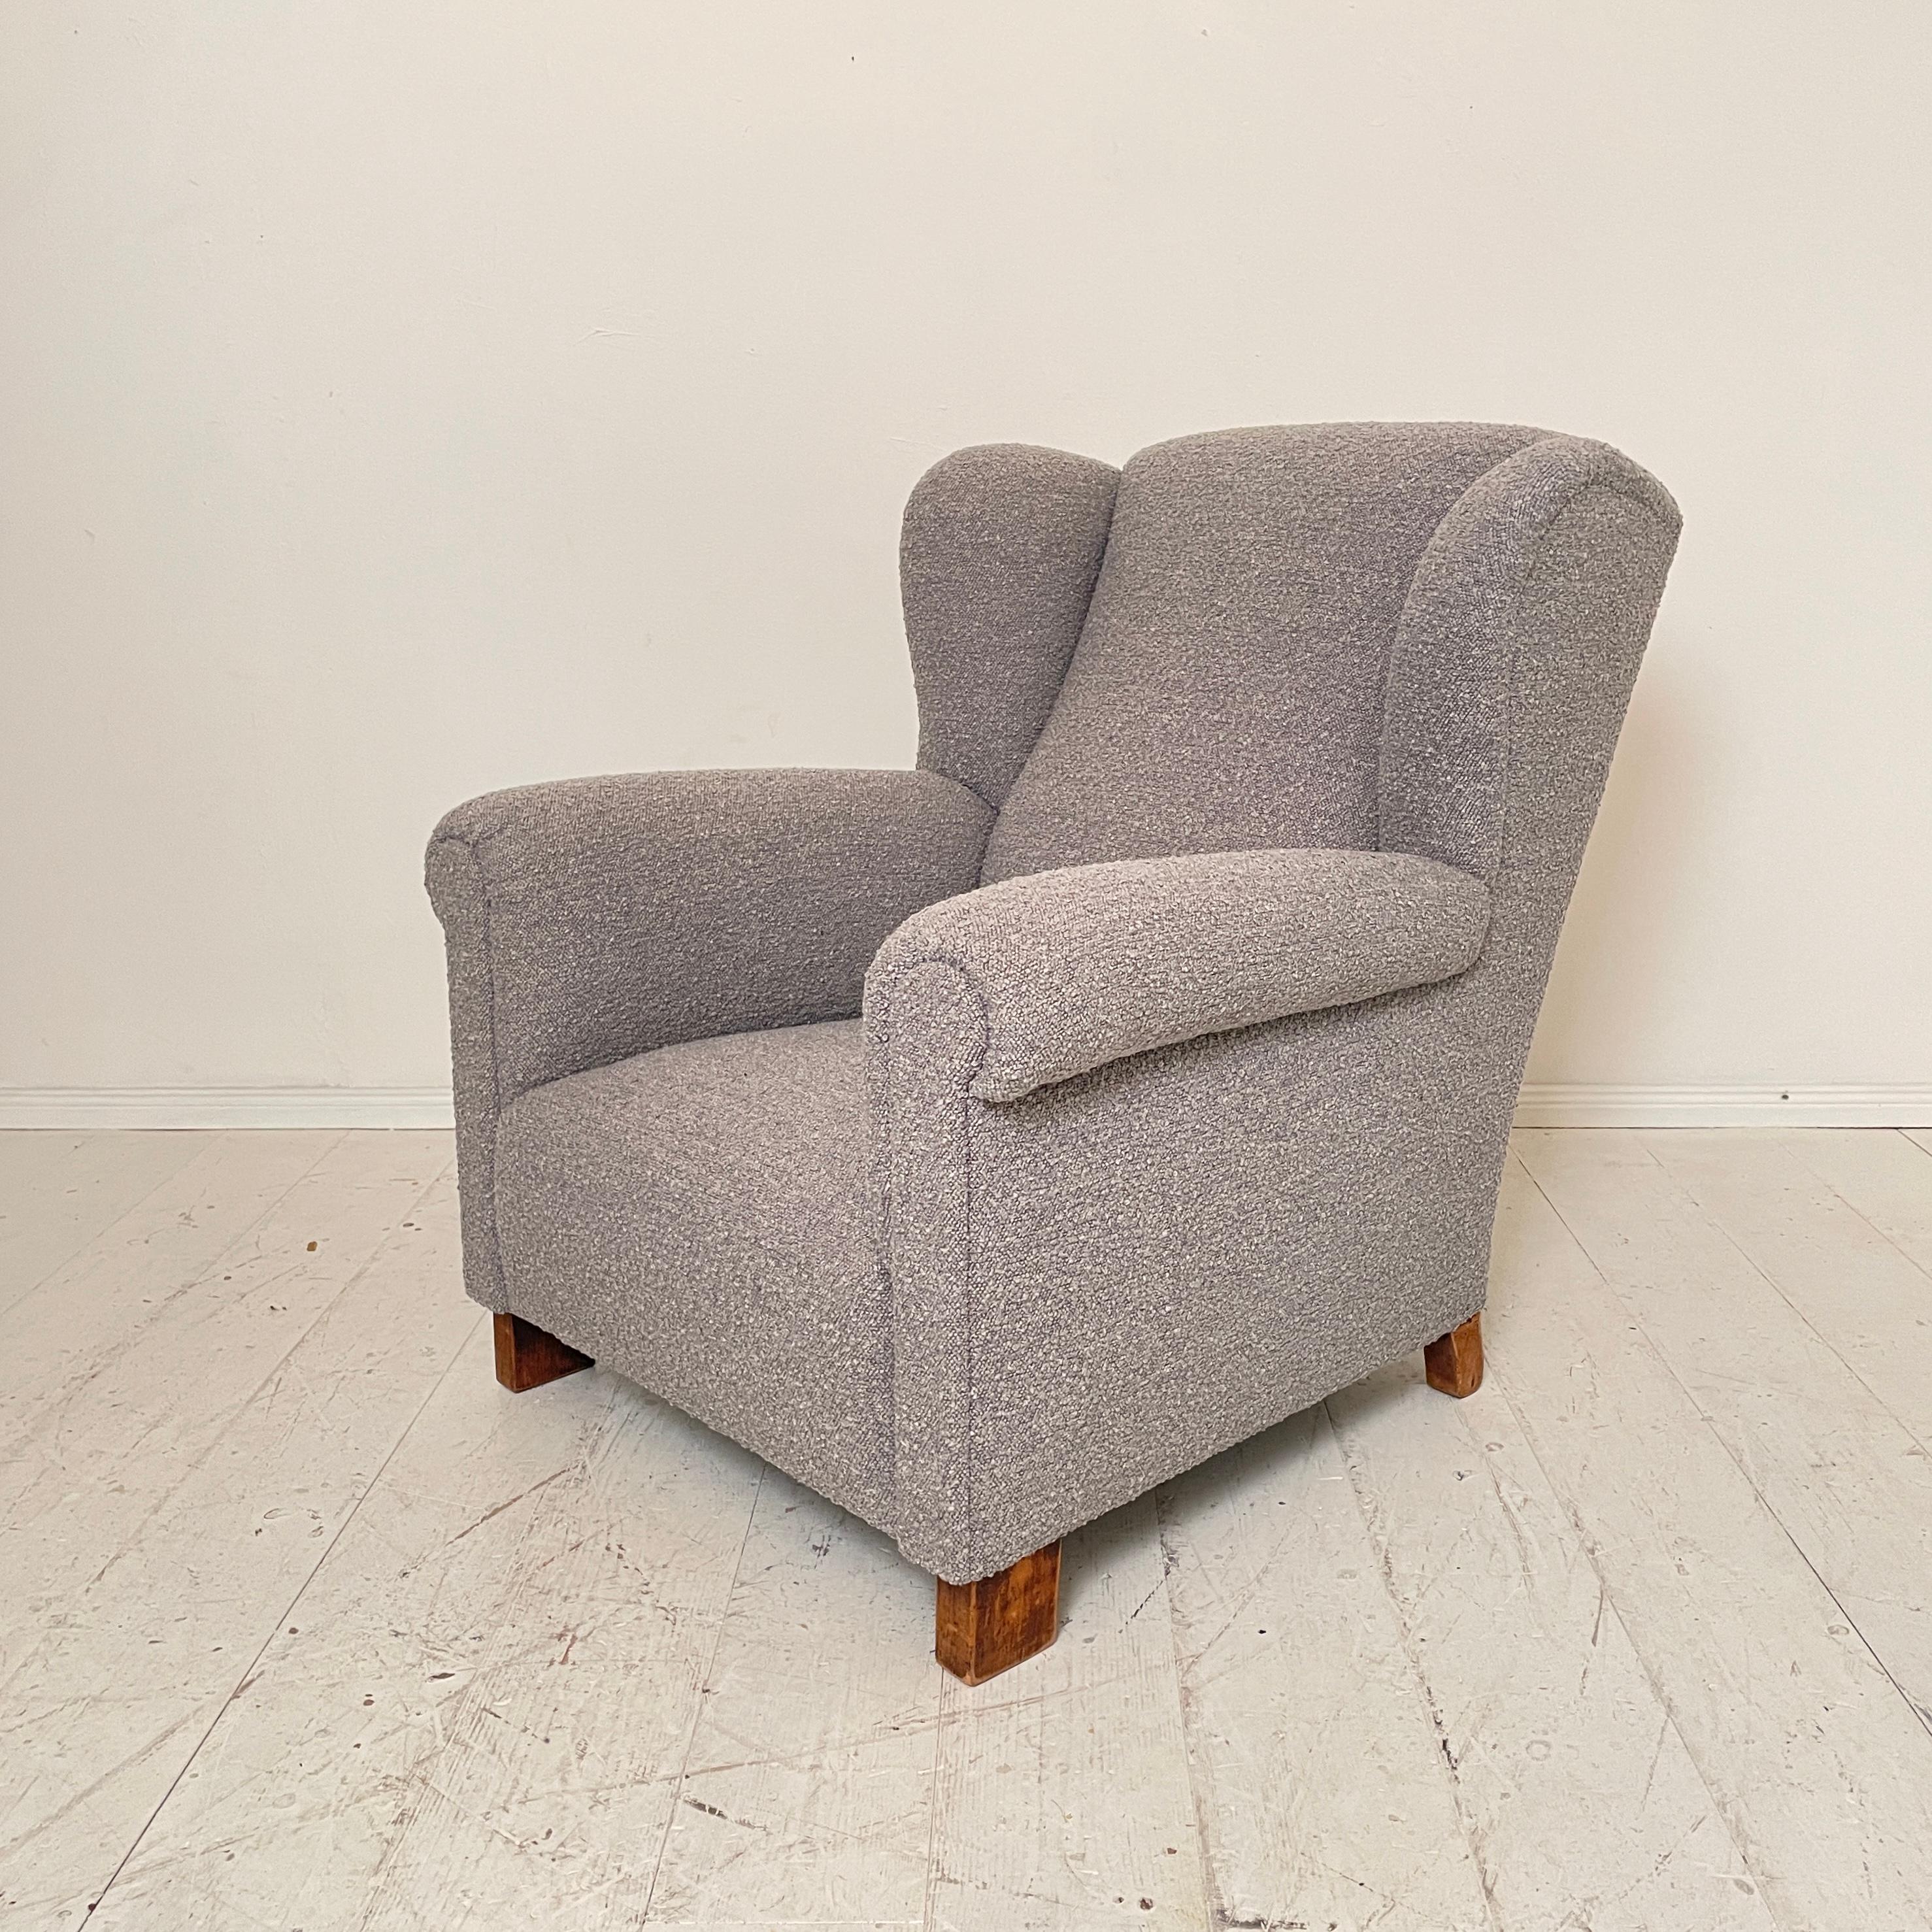 German Art Deco Wingback Chair in Gray Boucle Fabric, 1925 For Sale 6